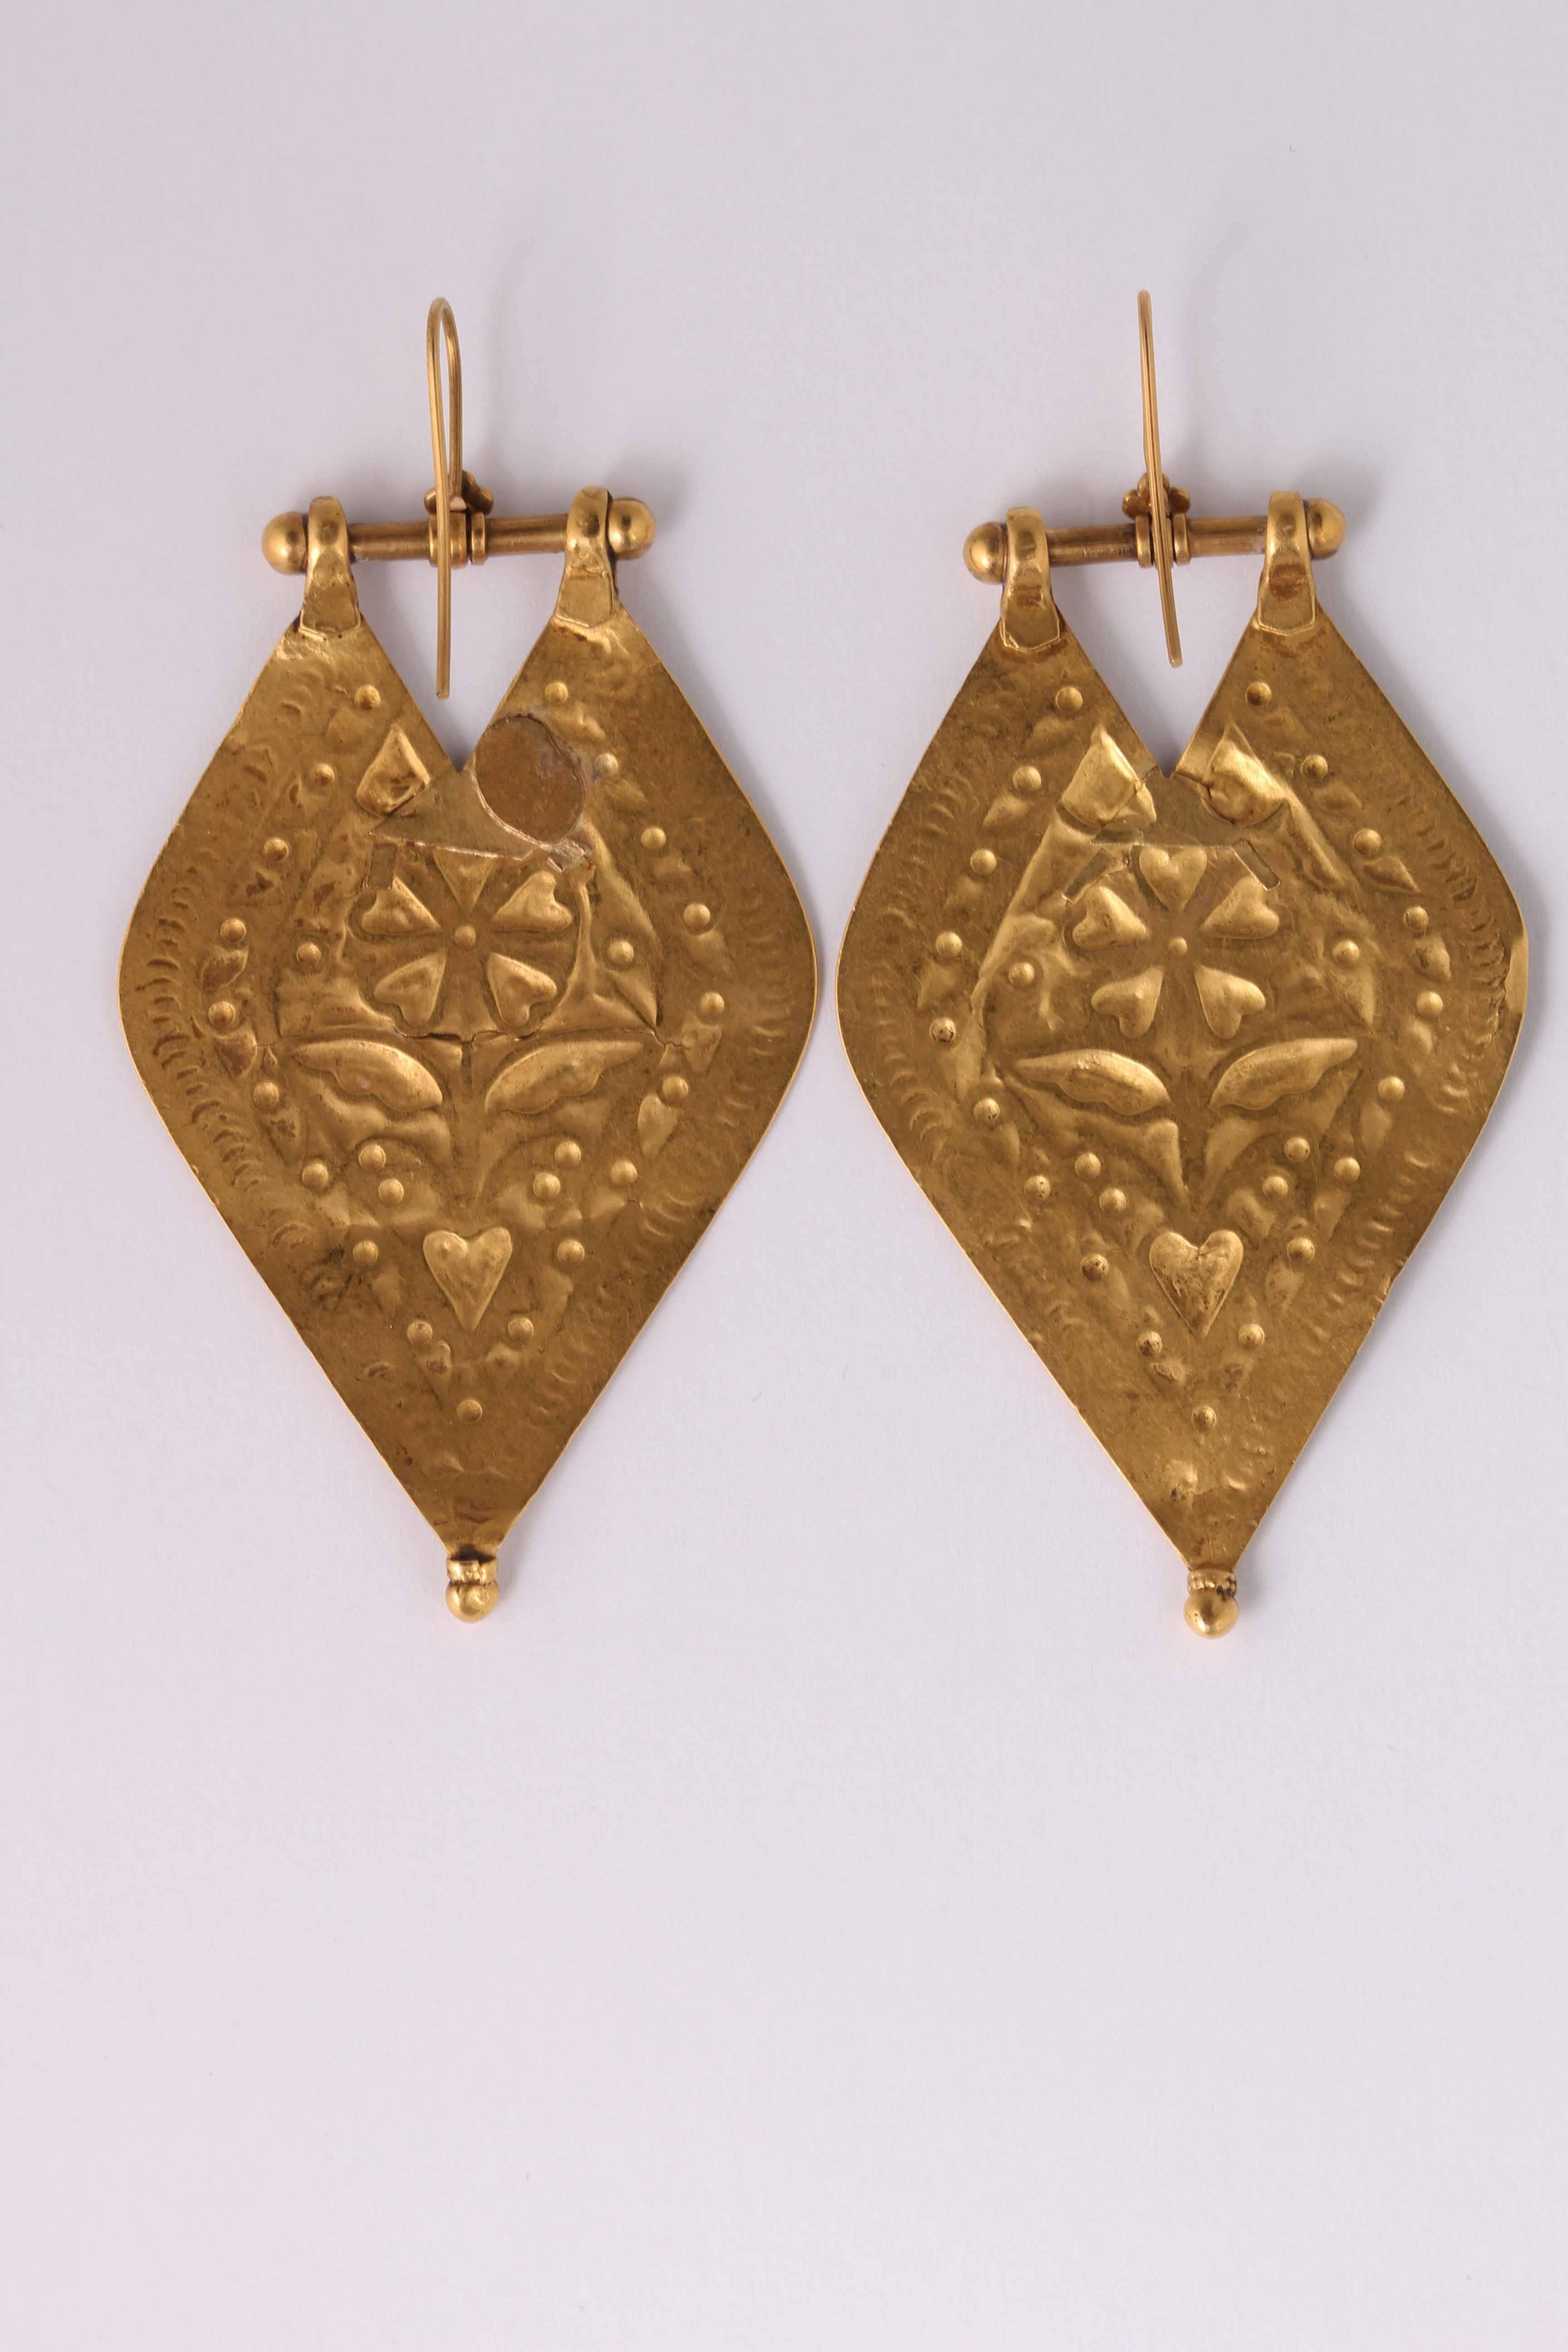 Antique Indian gold earrings, 22 ct gold, with refined decoration in a linear form.
Origin: Gujarat, first half 1900
Measurements: 41 x 66.5 mm (without hook), 41 x 78 mm (with hook)

